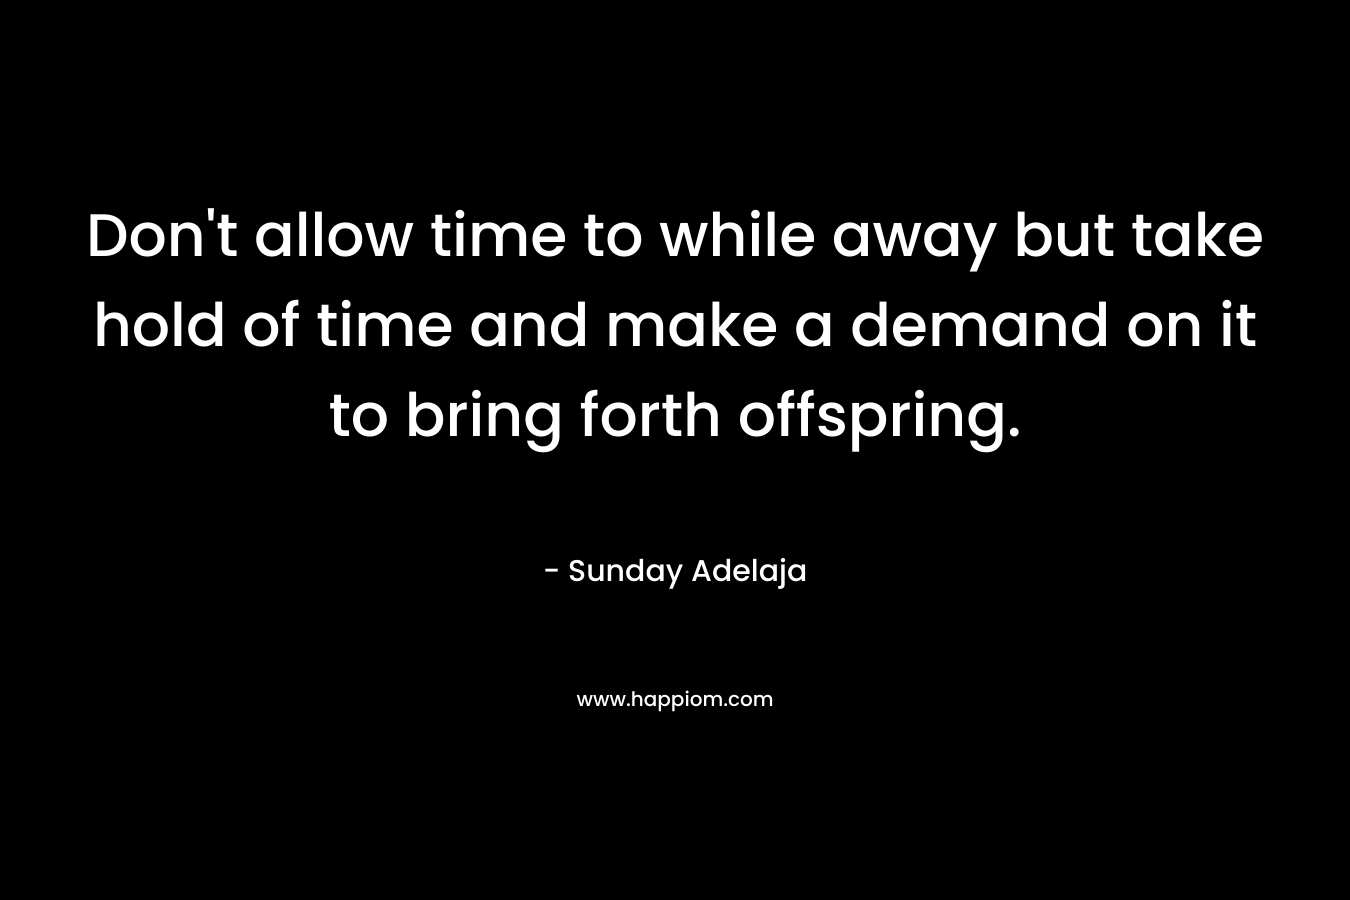 Don't allow time to while away but take hold of time and make a demand on it to bring forth offspring.